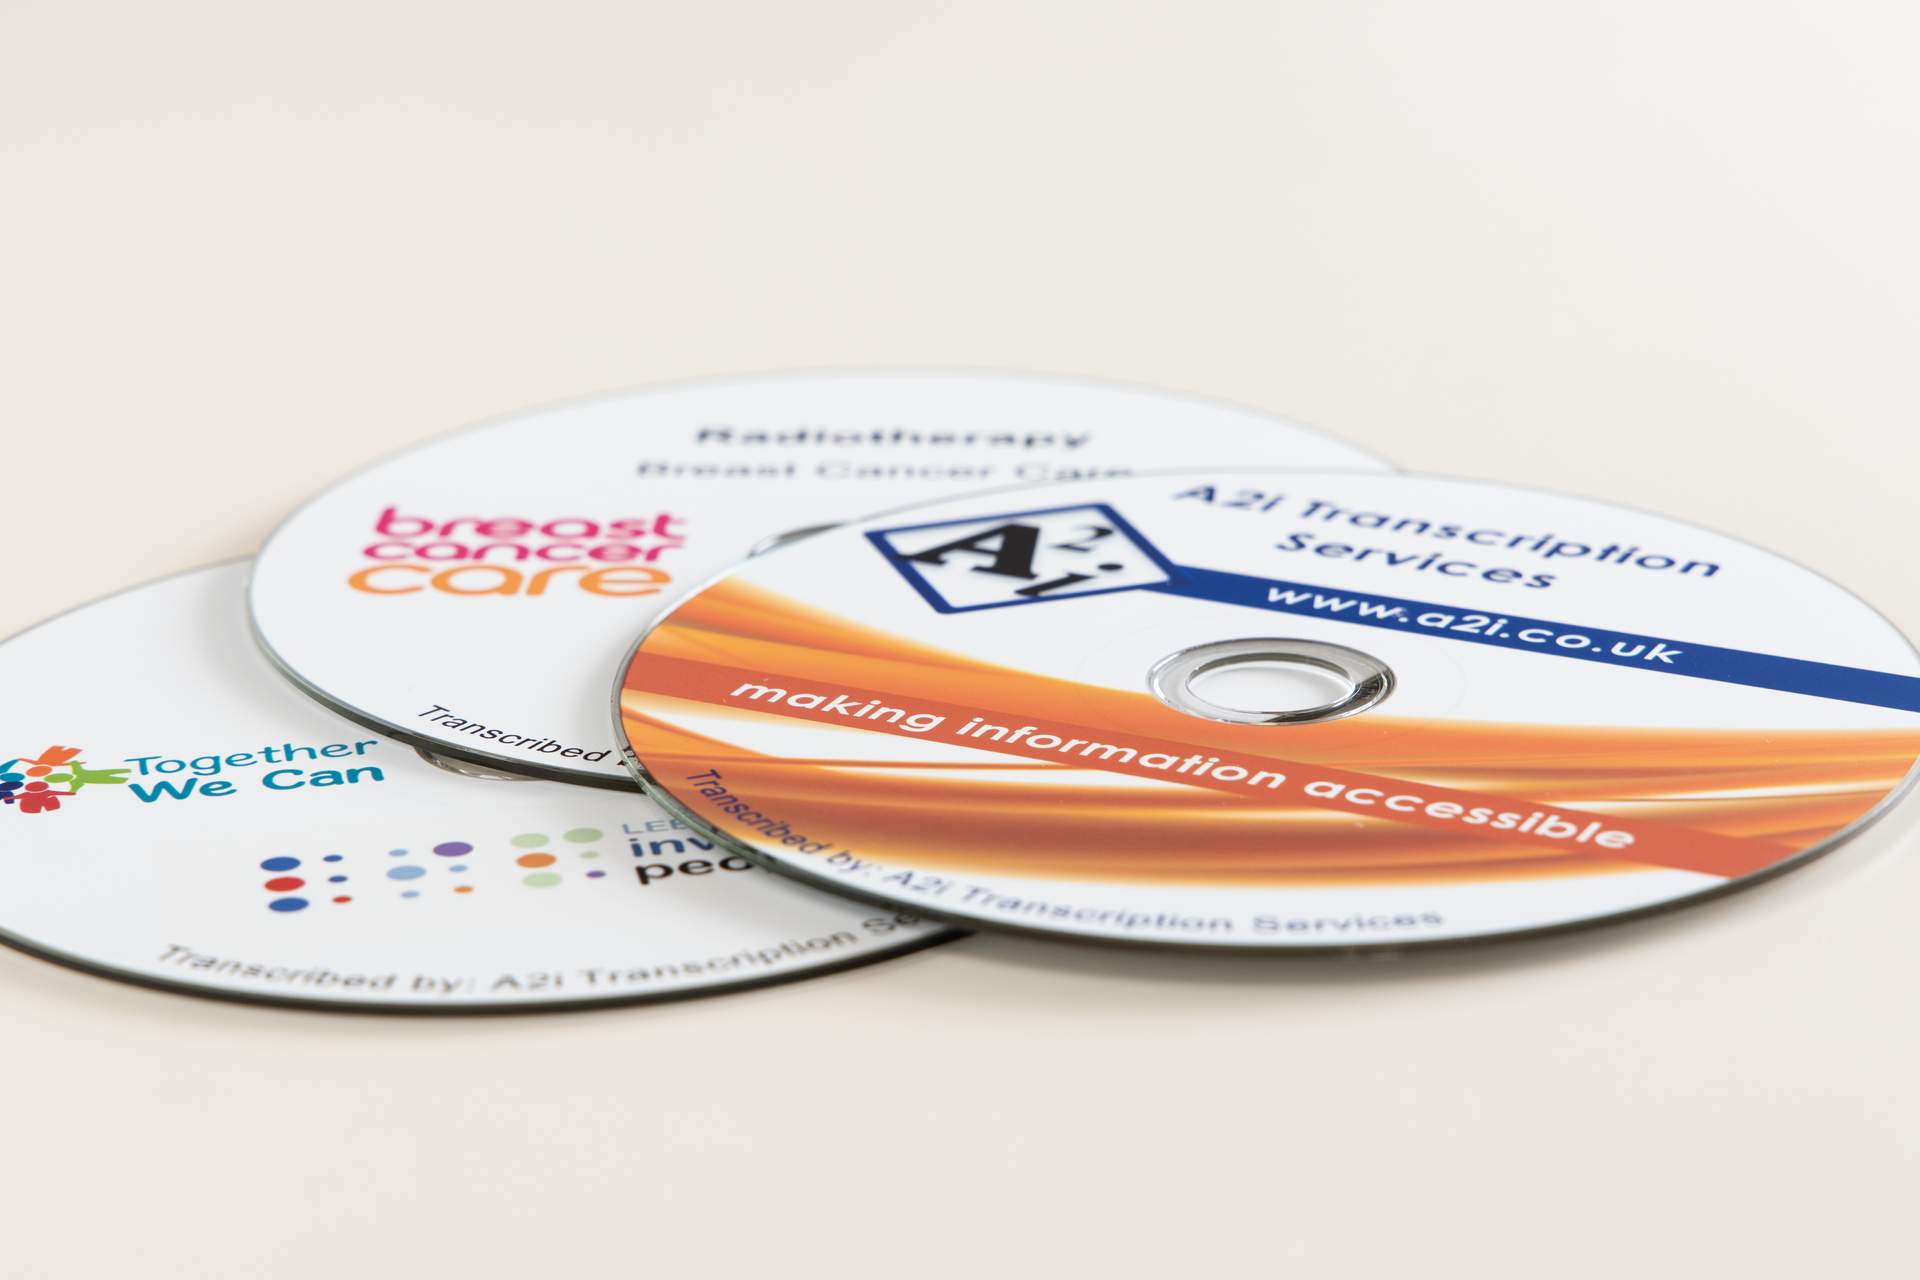 3 CD's with full branding for each individual organisation